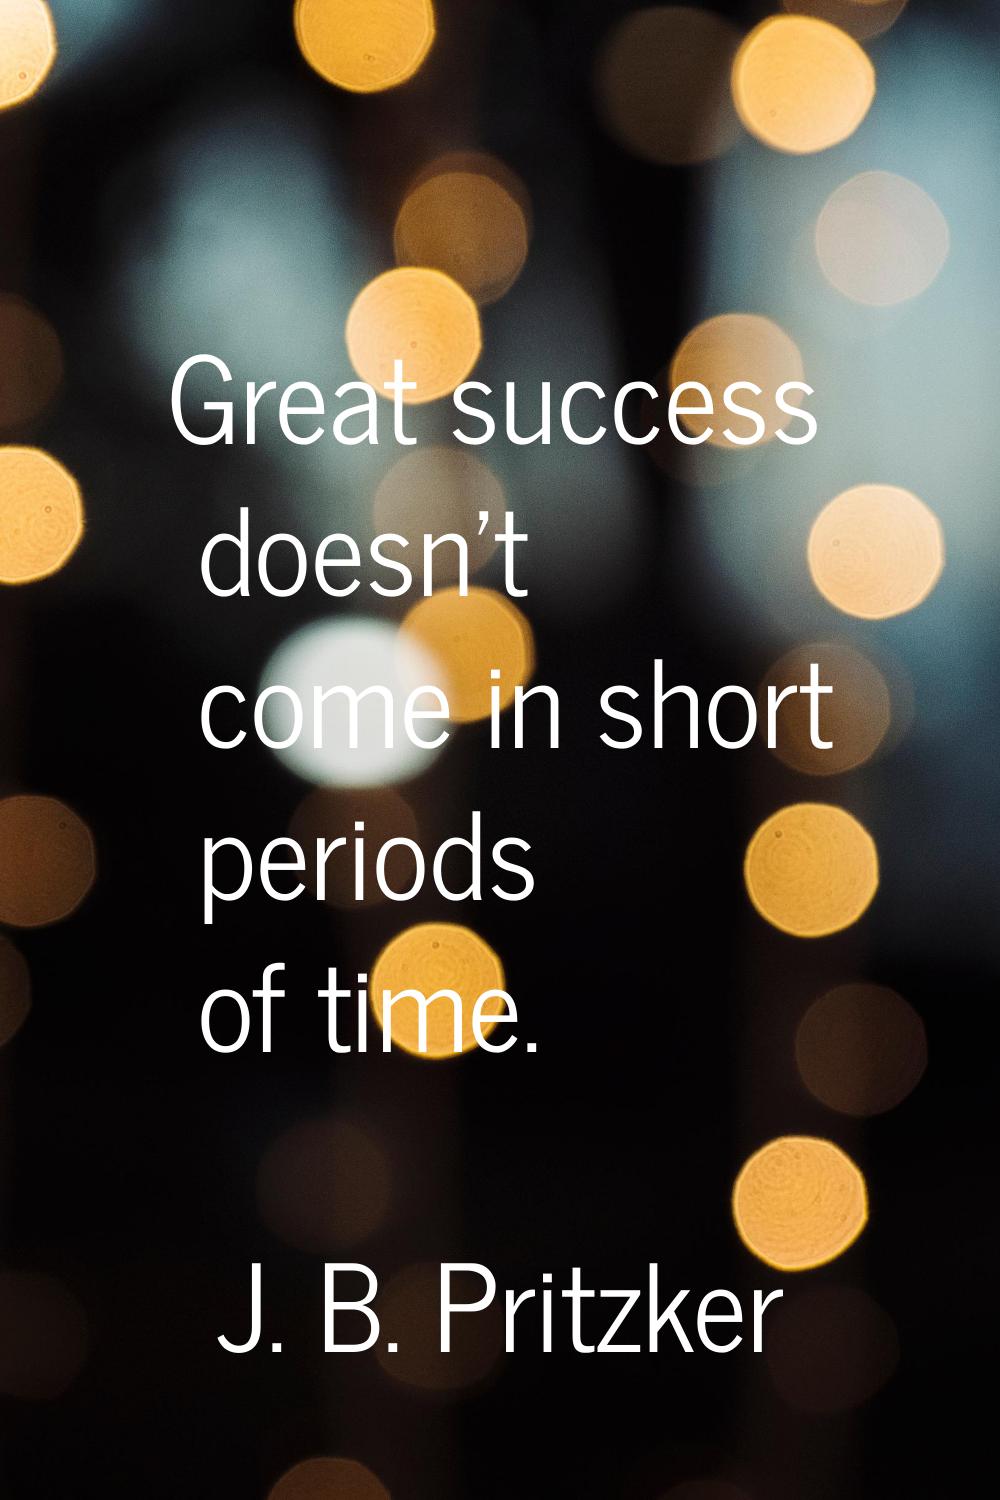 Great success doesn't come in short periods of time.